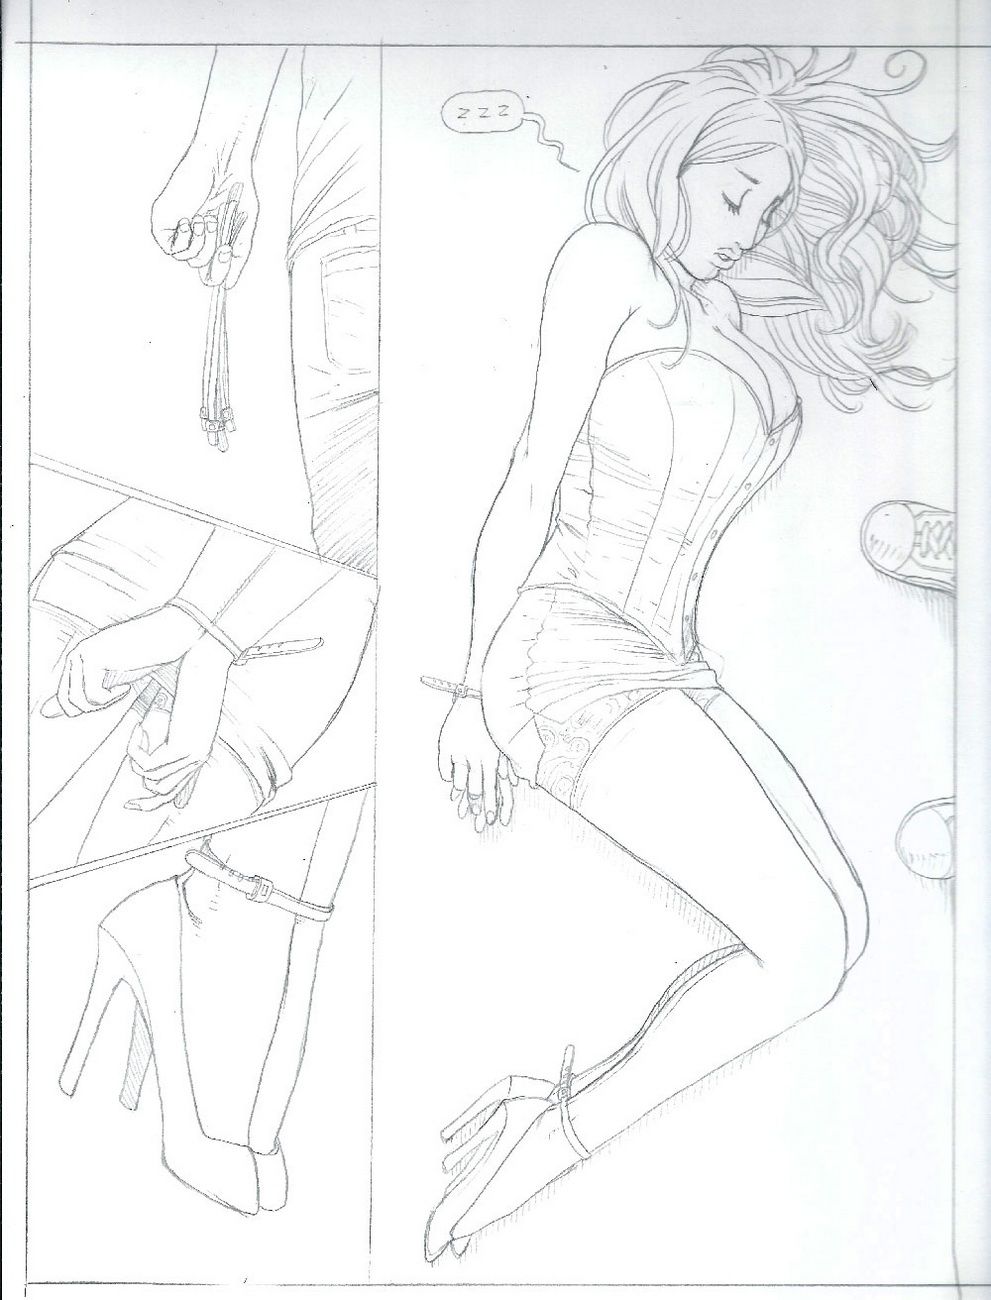 Submission Agenda 1 - Emma Frost page 10